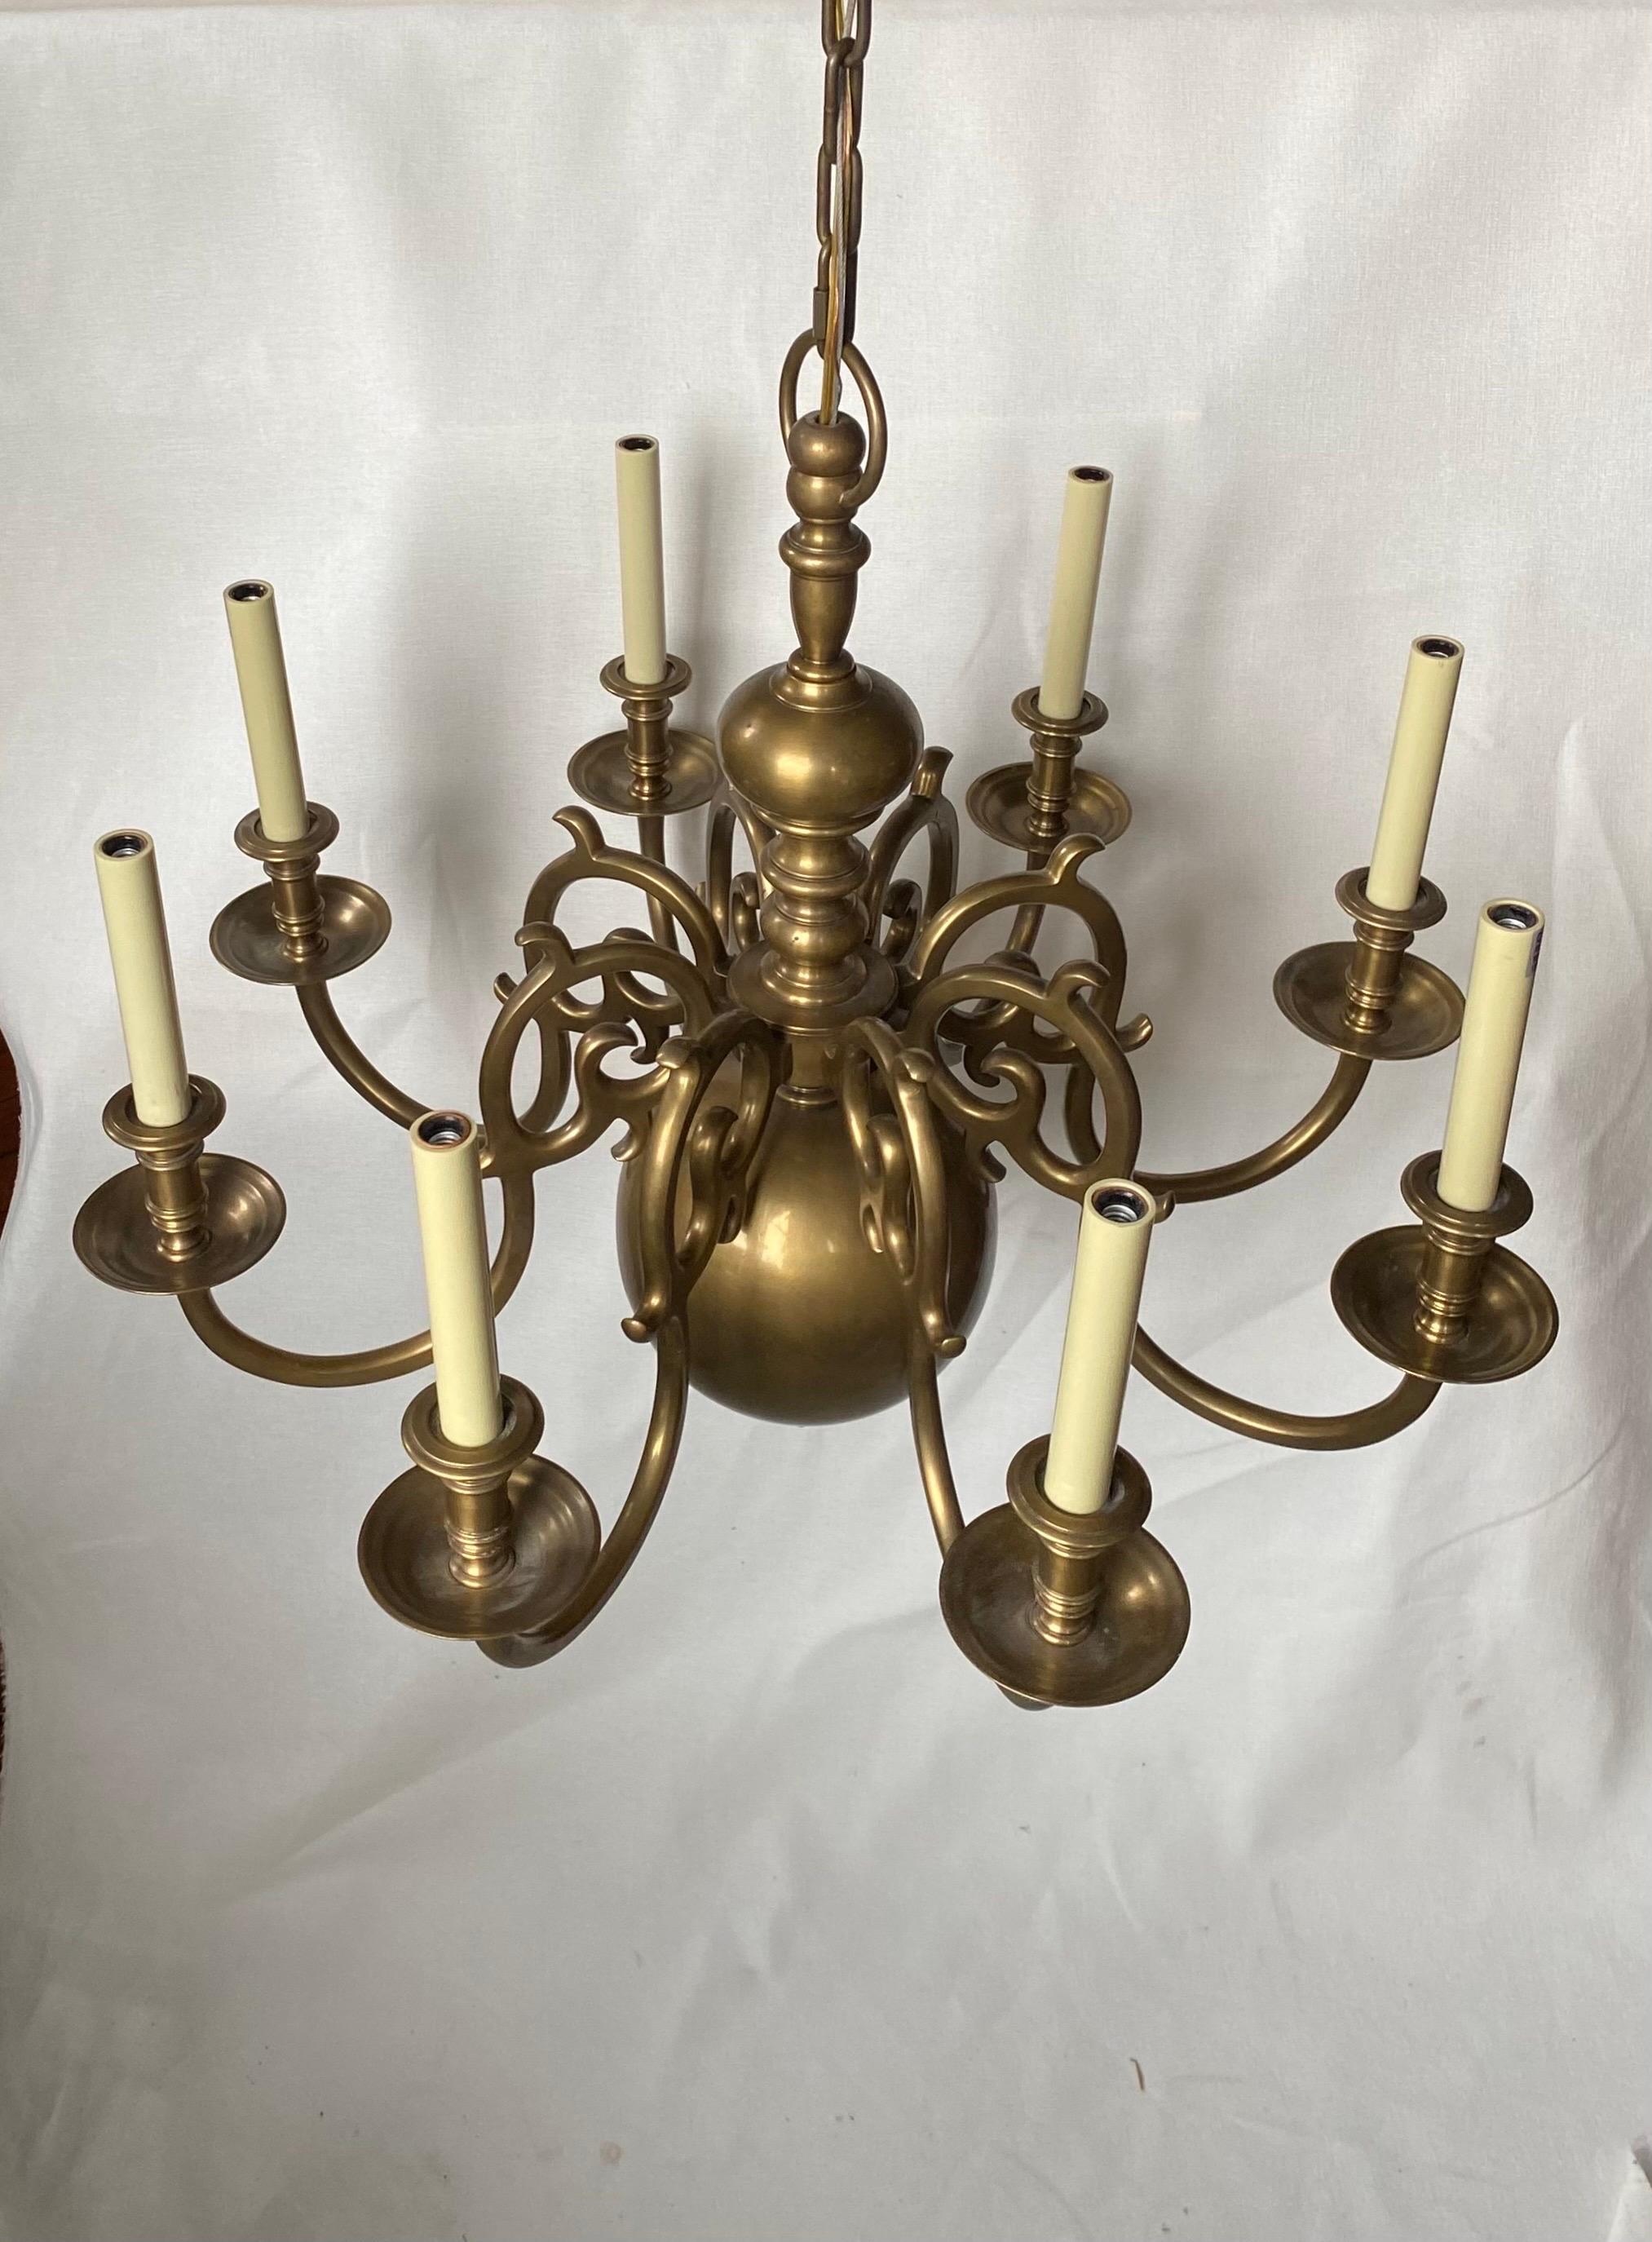 Large handsome Dutch Baroque style 8-Light chandelier by Visual Comfort.  This classic Georgian style chandelier has a beautiful brass patina with bronze undertones.  A classic traditional piece with timeless appeal.  Includes canopy and 13 Inches